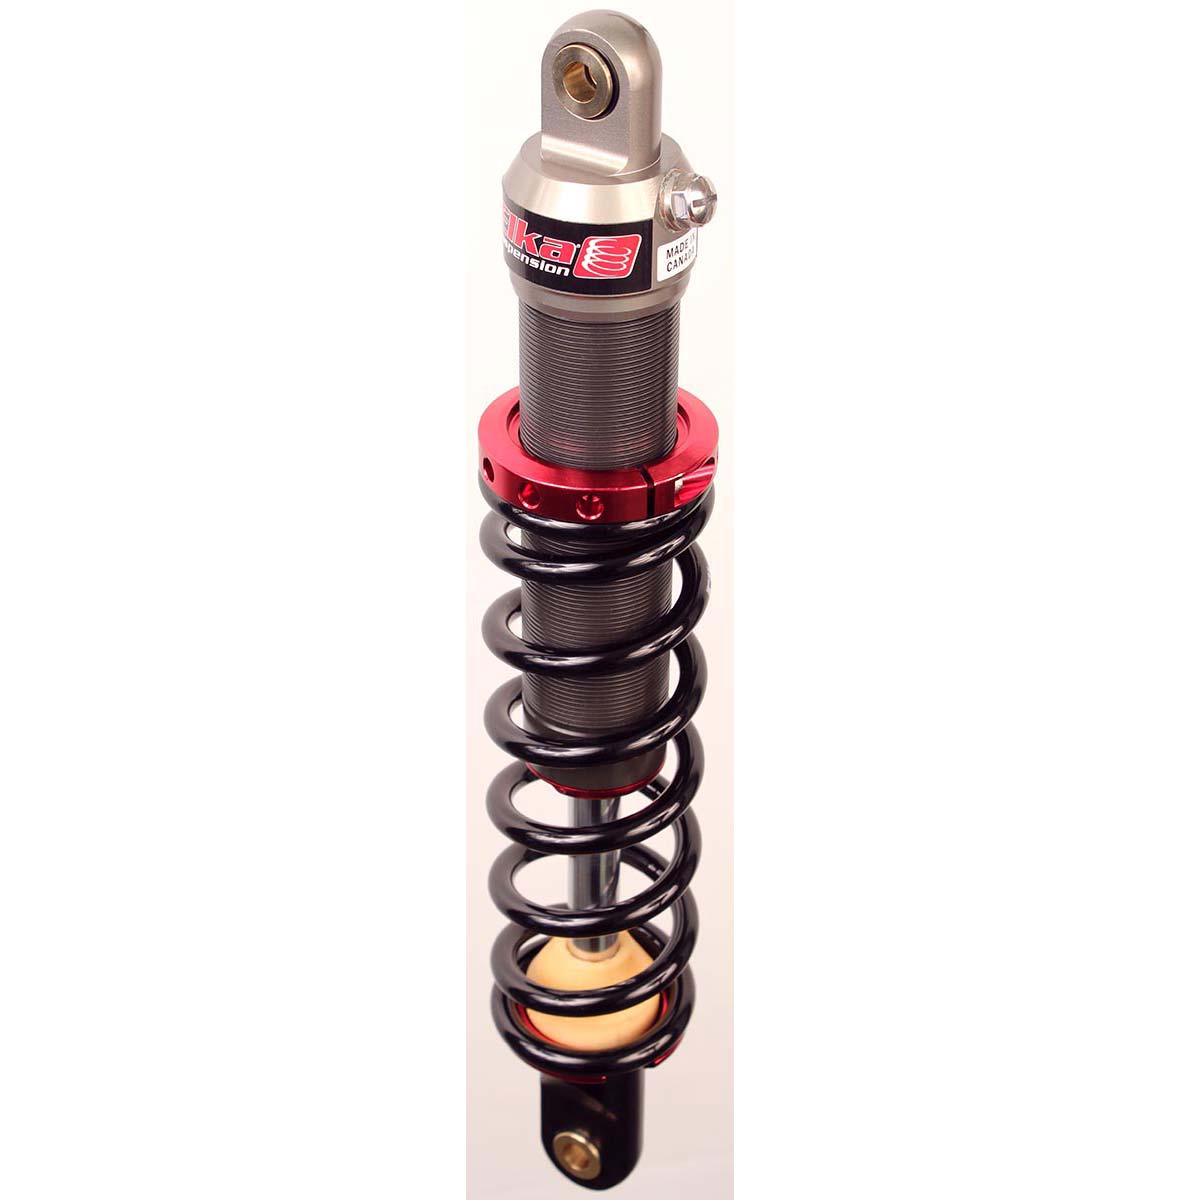 STAGE 1 FRONT SHOCKS for ARCTIC CAT DVX400, 2006 to 2008